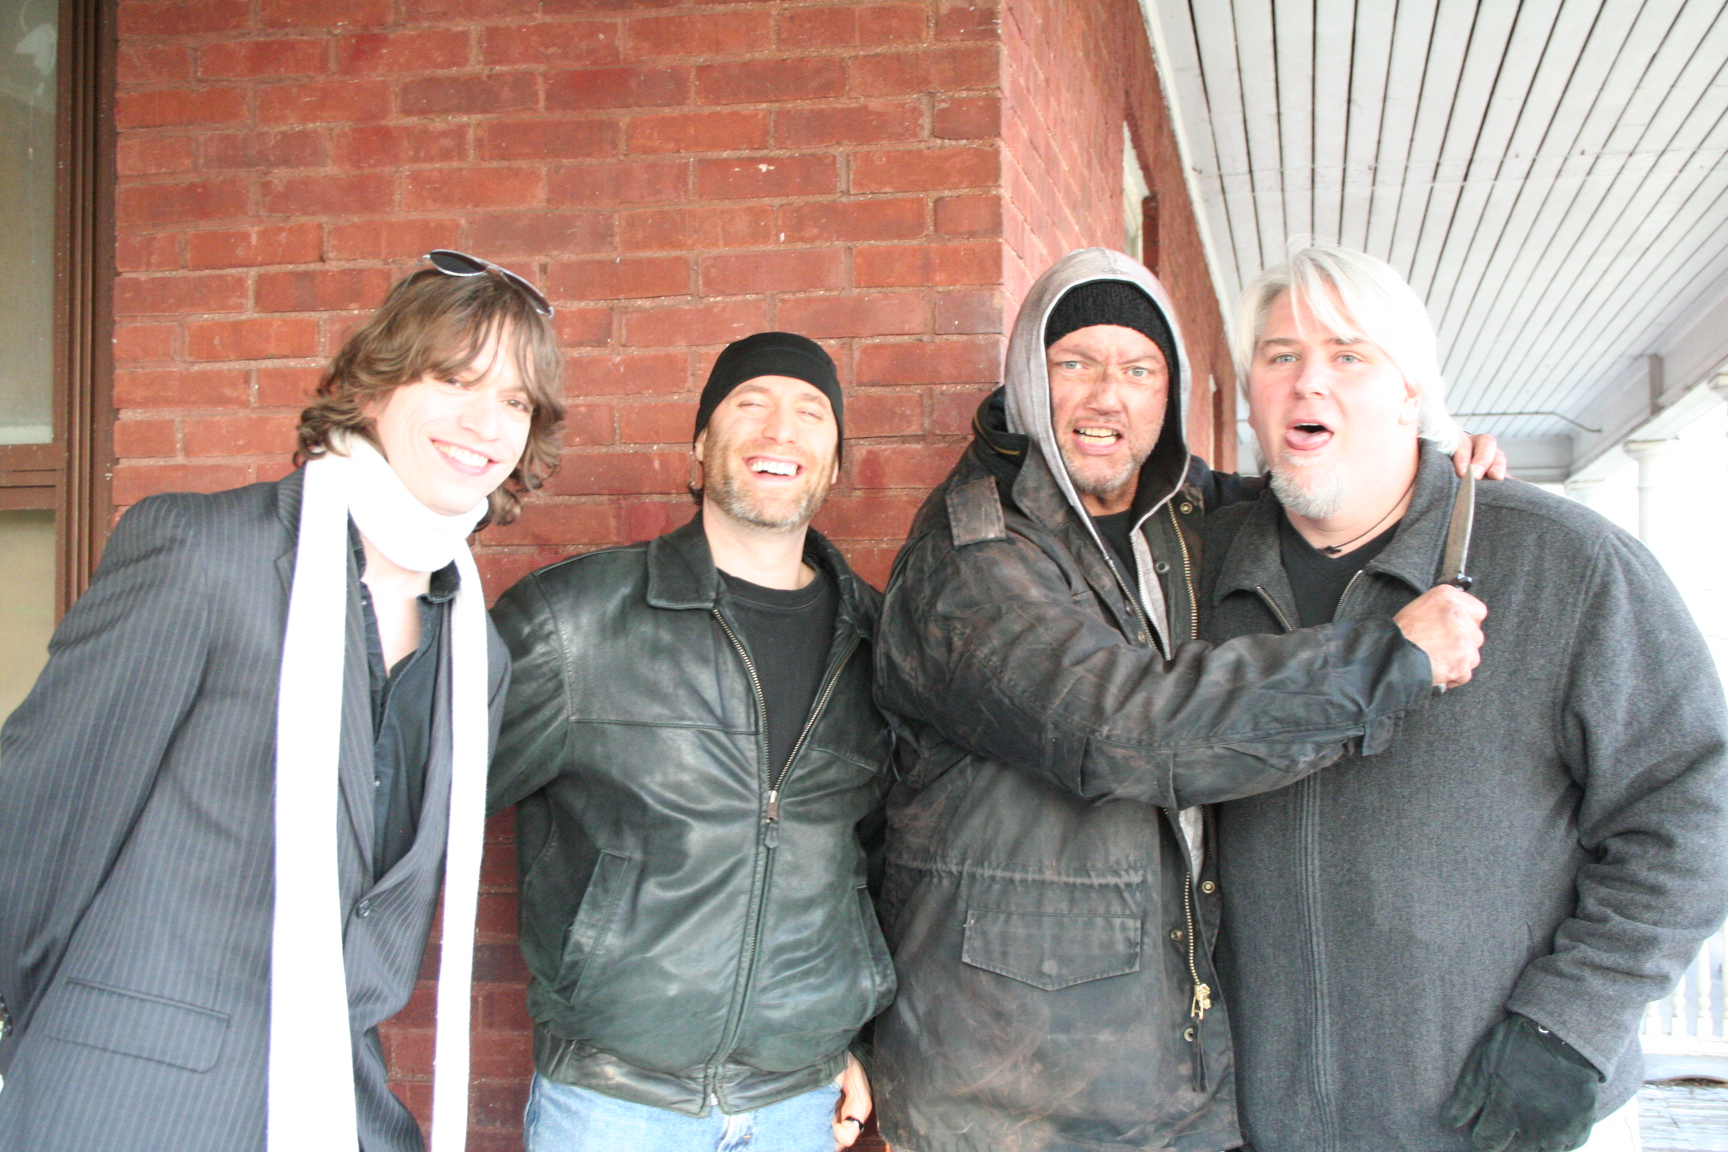 On location for 'The Burningmoore Incident' with actors Jon Conver and Geoff Tate, and executive producer Thomas David